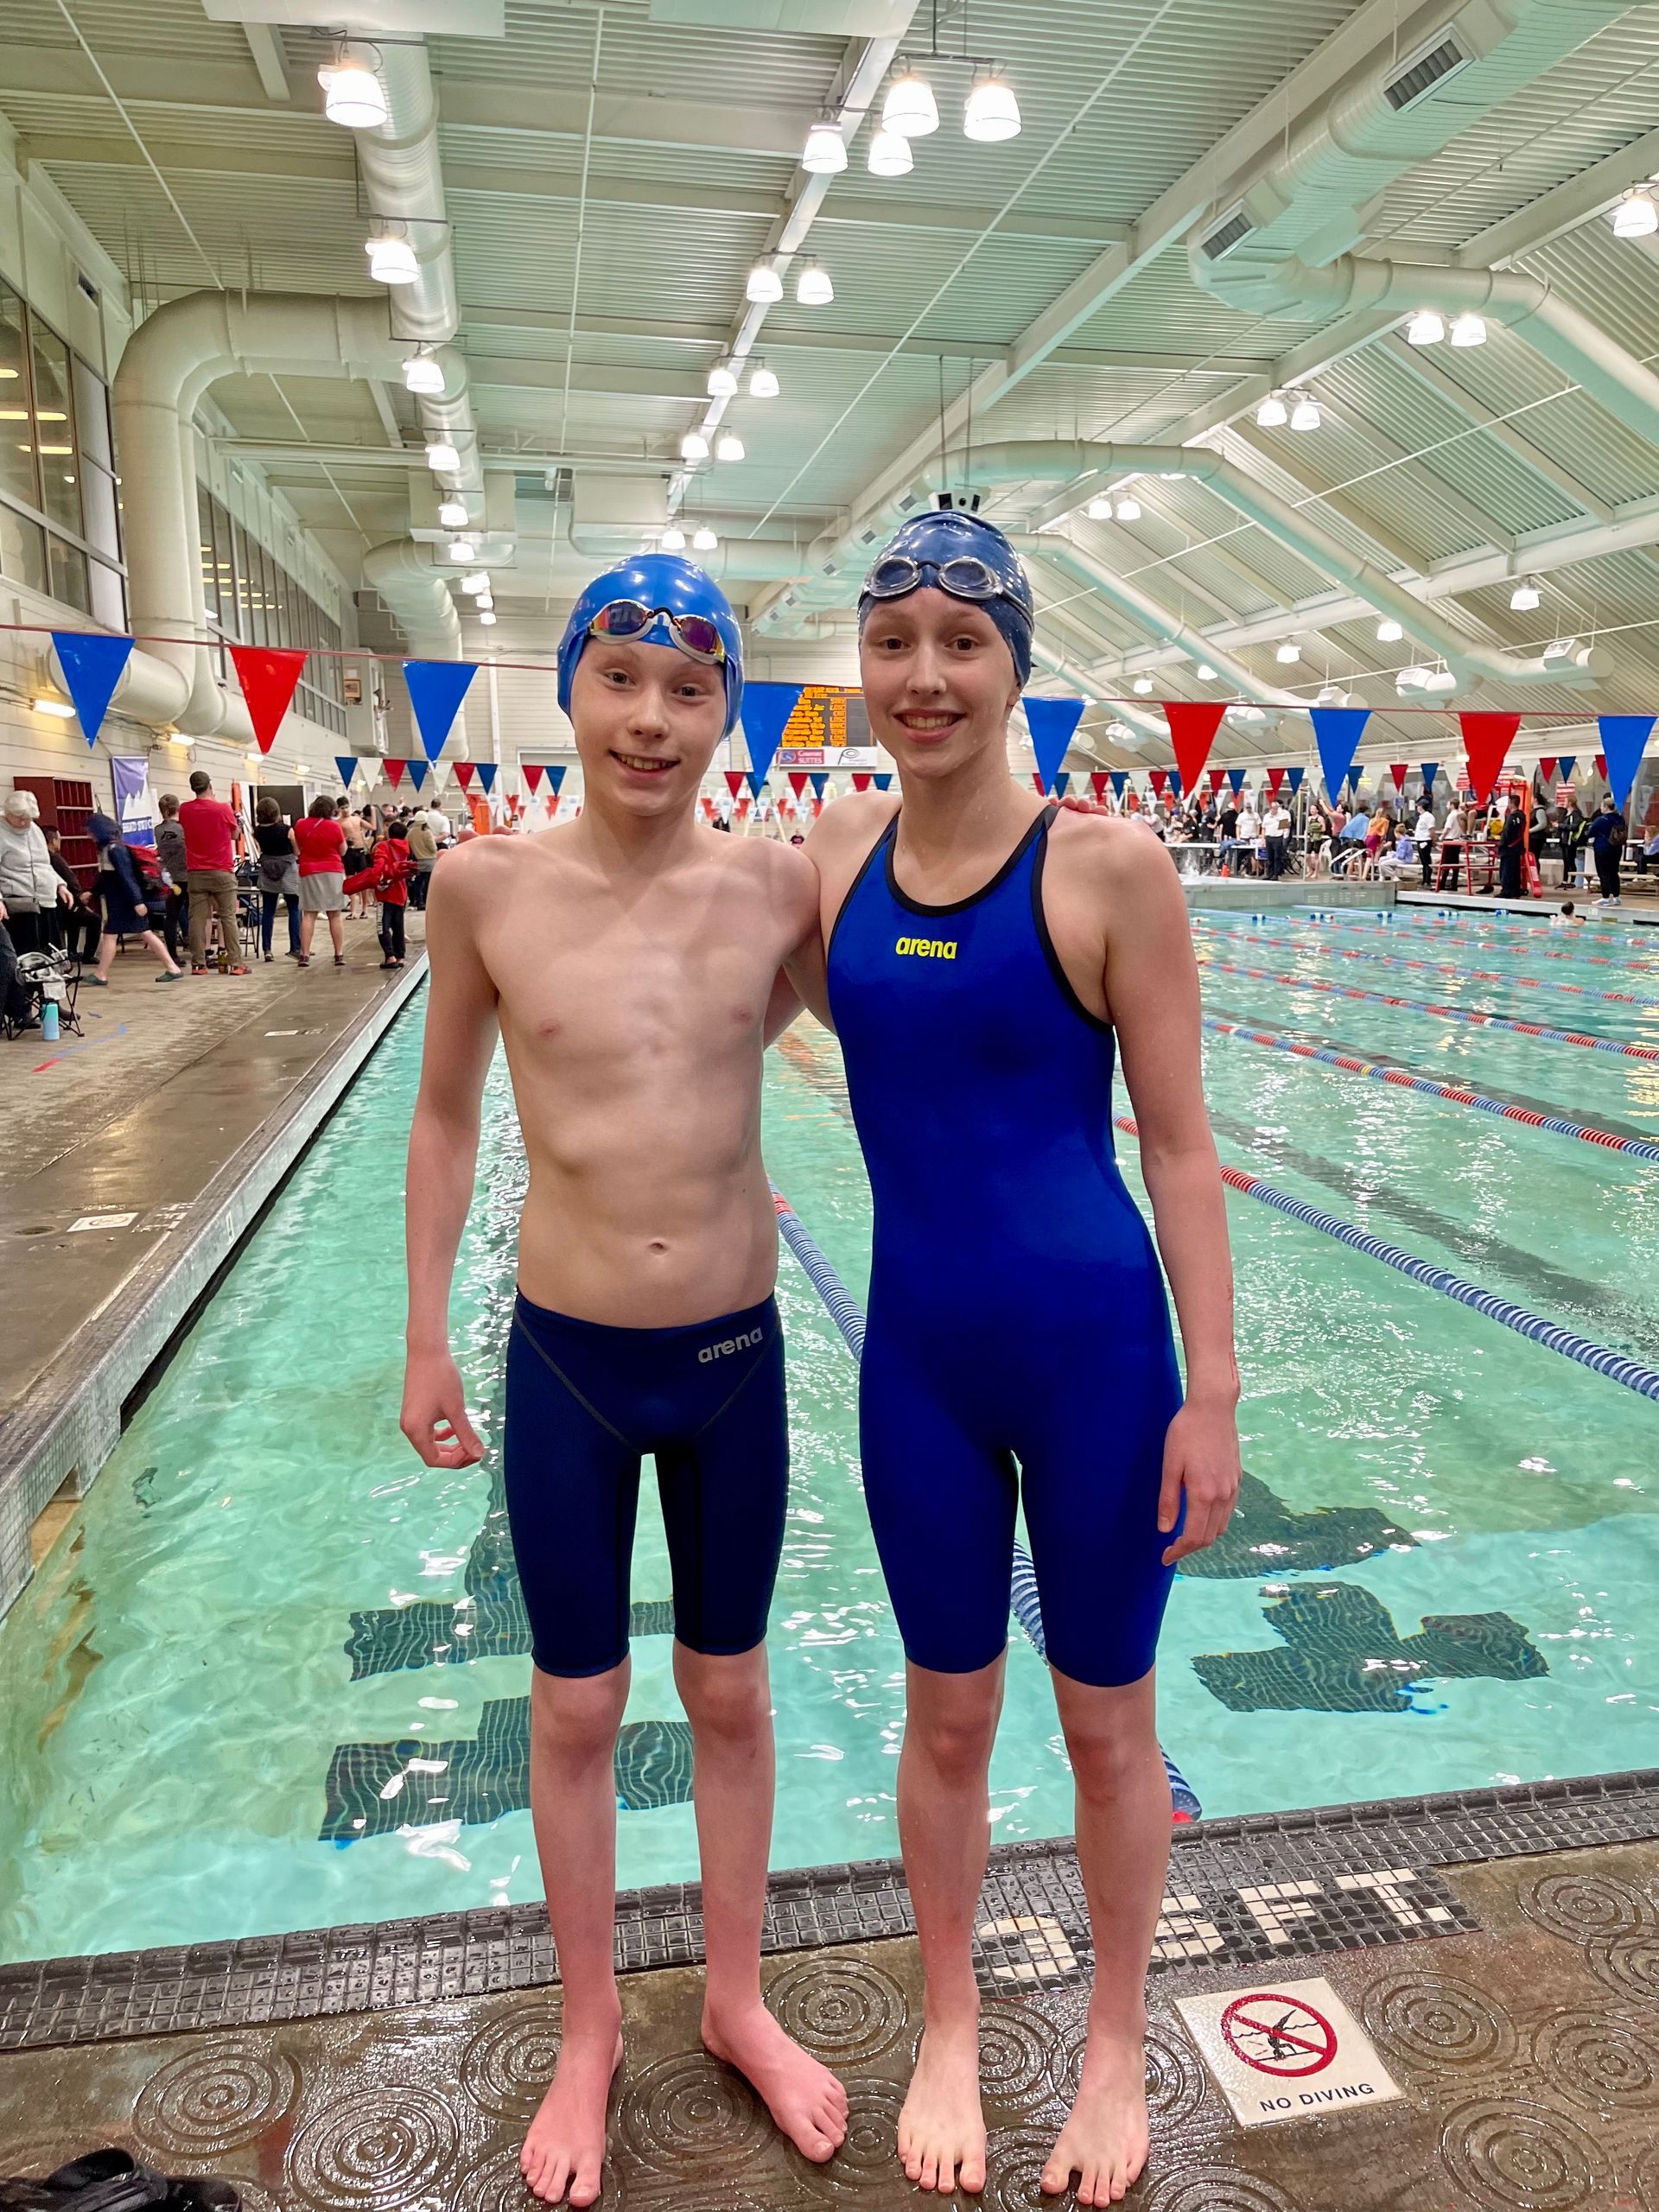 a boy and a girl are standing next to each other in front of a pool wearing arena swimsuits